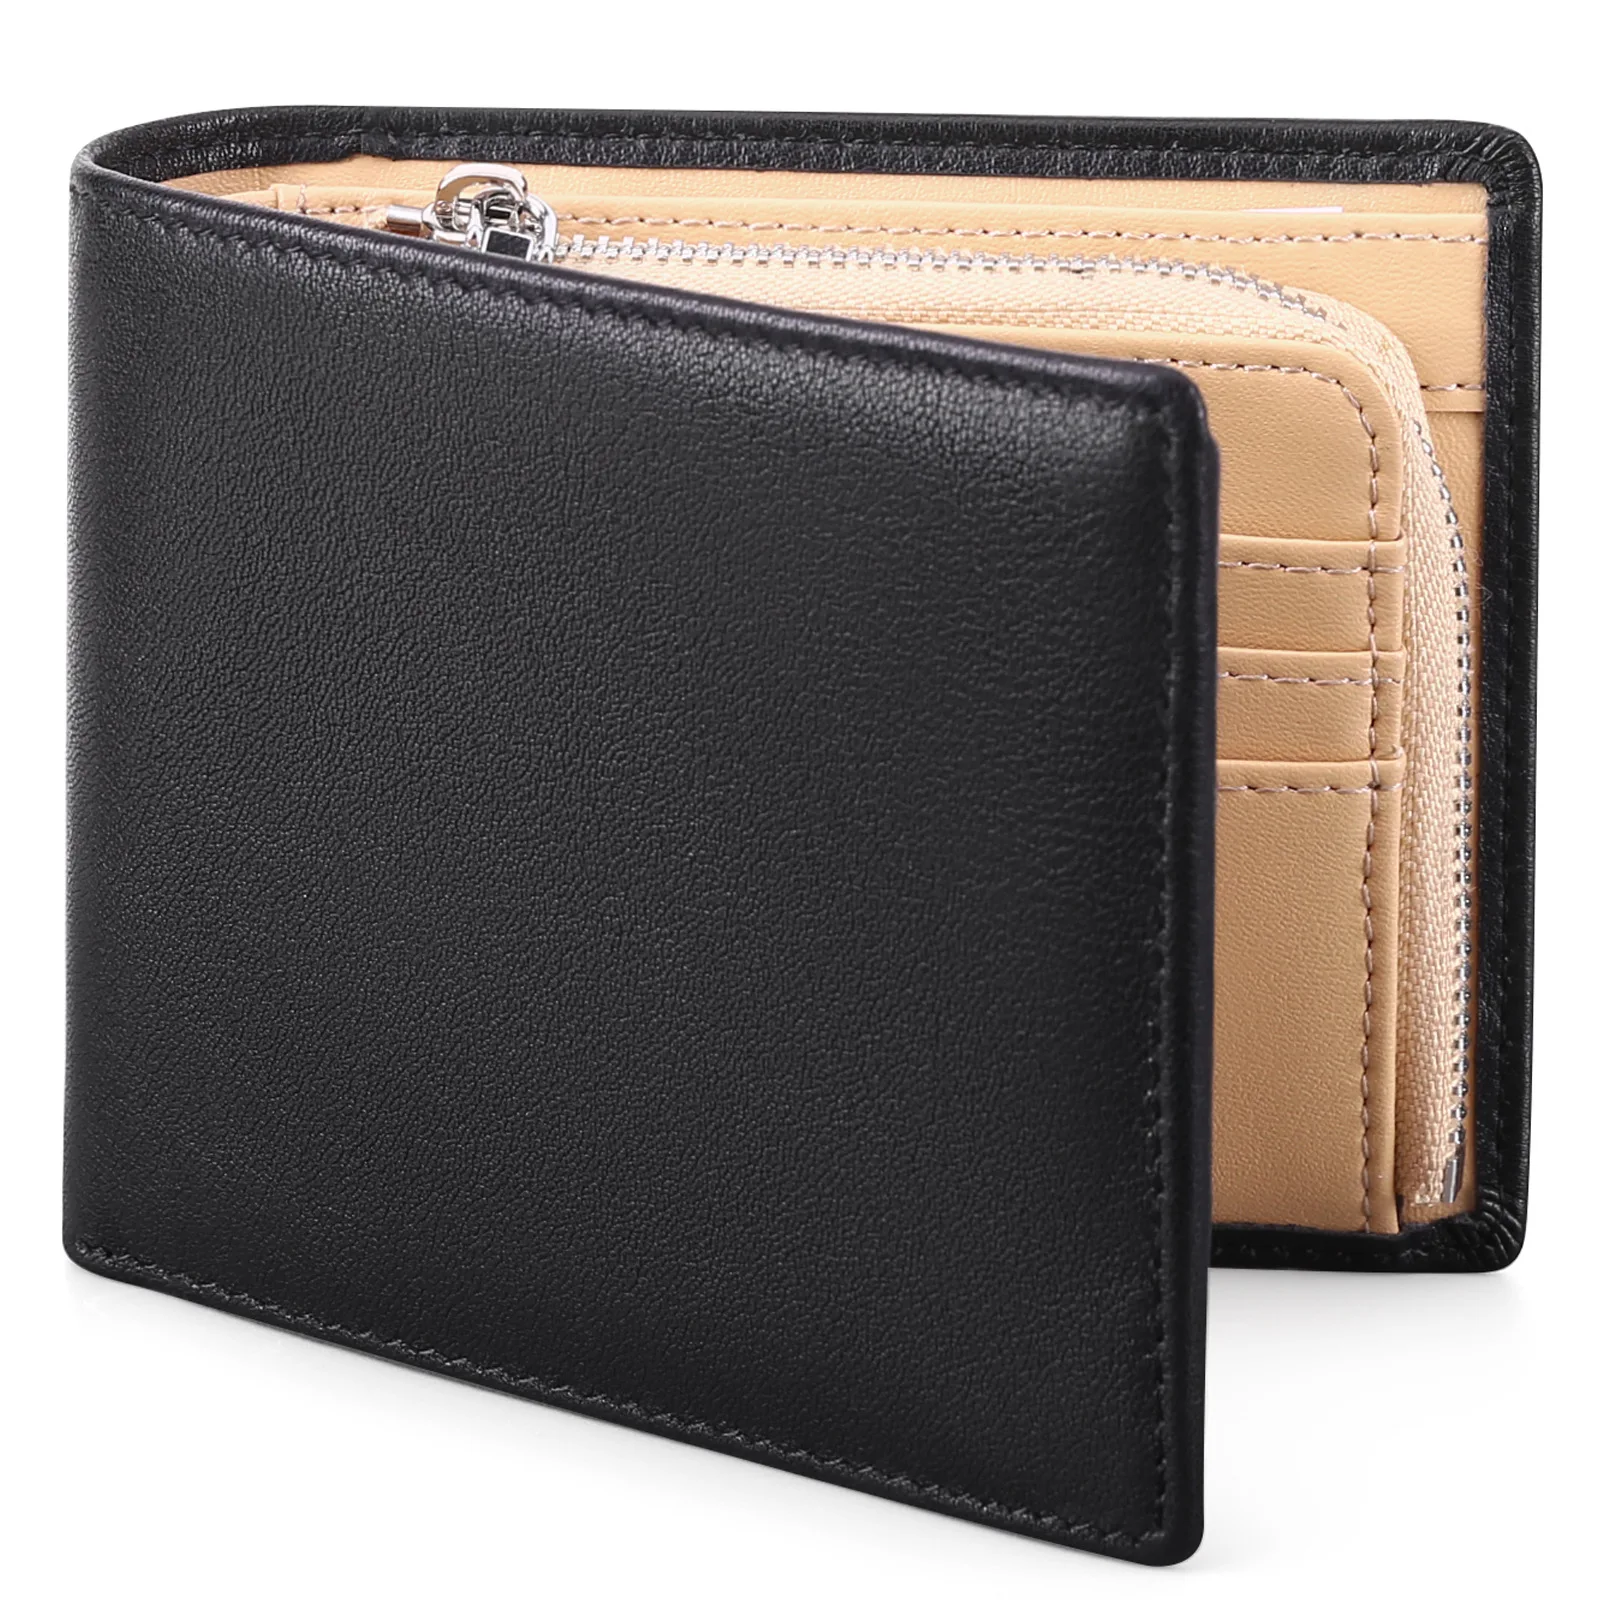 Men Genuine Cow Leather Purses Cowhide Mini Wallets Quality Coin Pocket RFID Blocking Small Card Holder